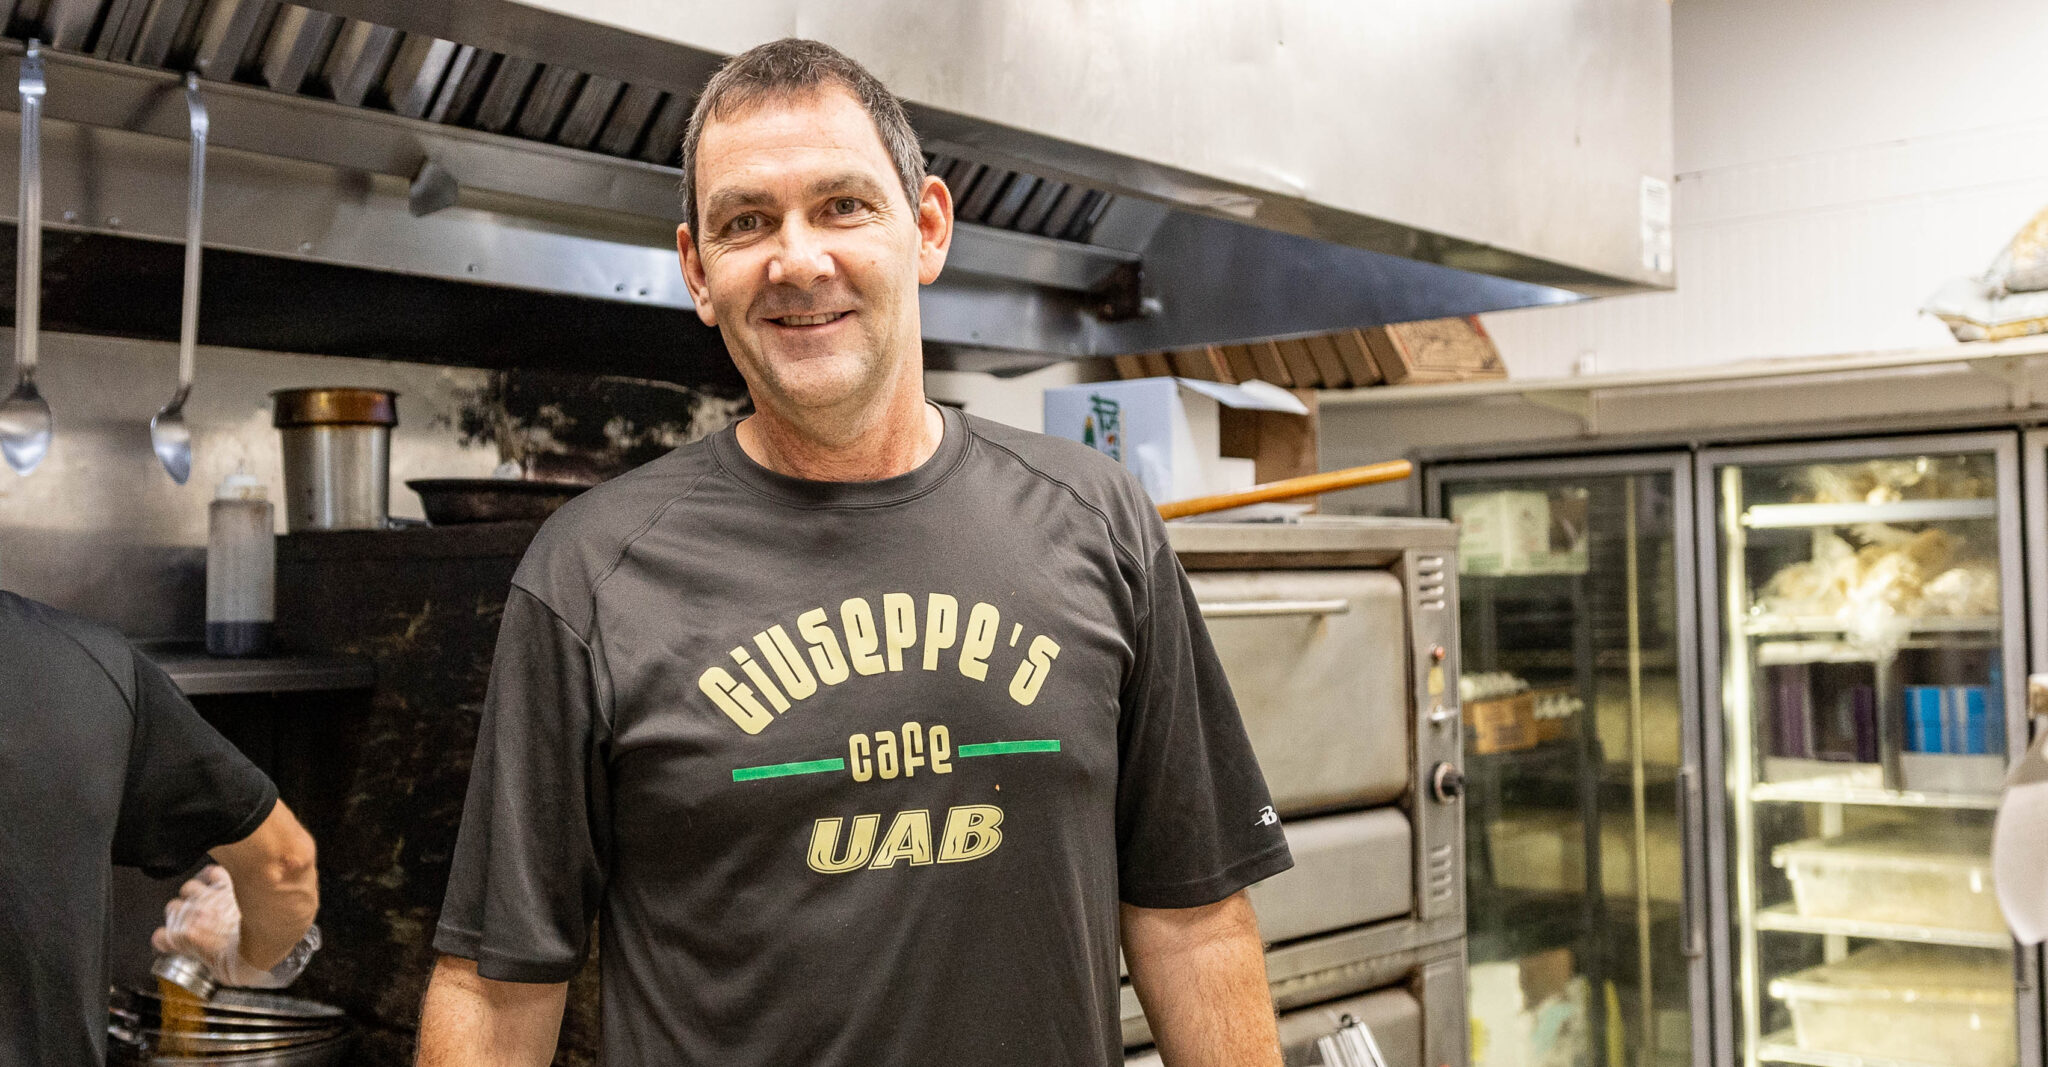 Giuseppe’s Cafe is OPEN, perfectly timed for the World Games [PHOTOS]